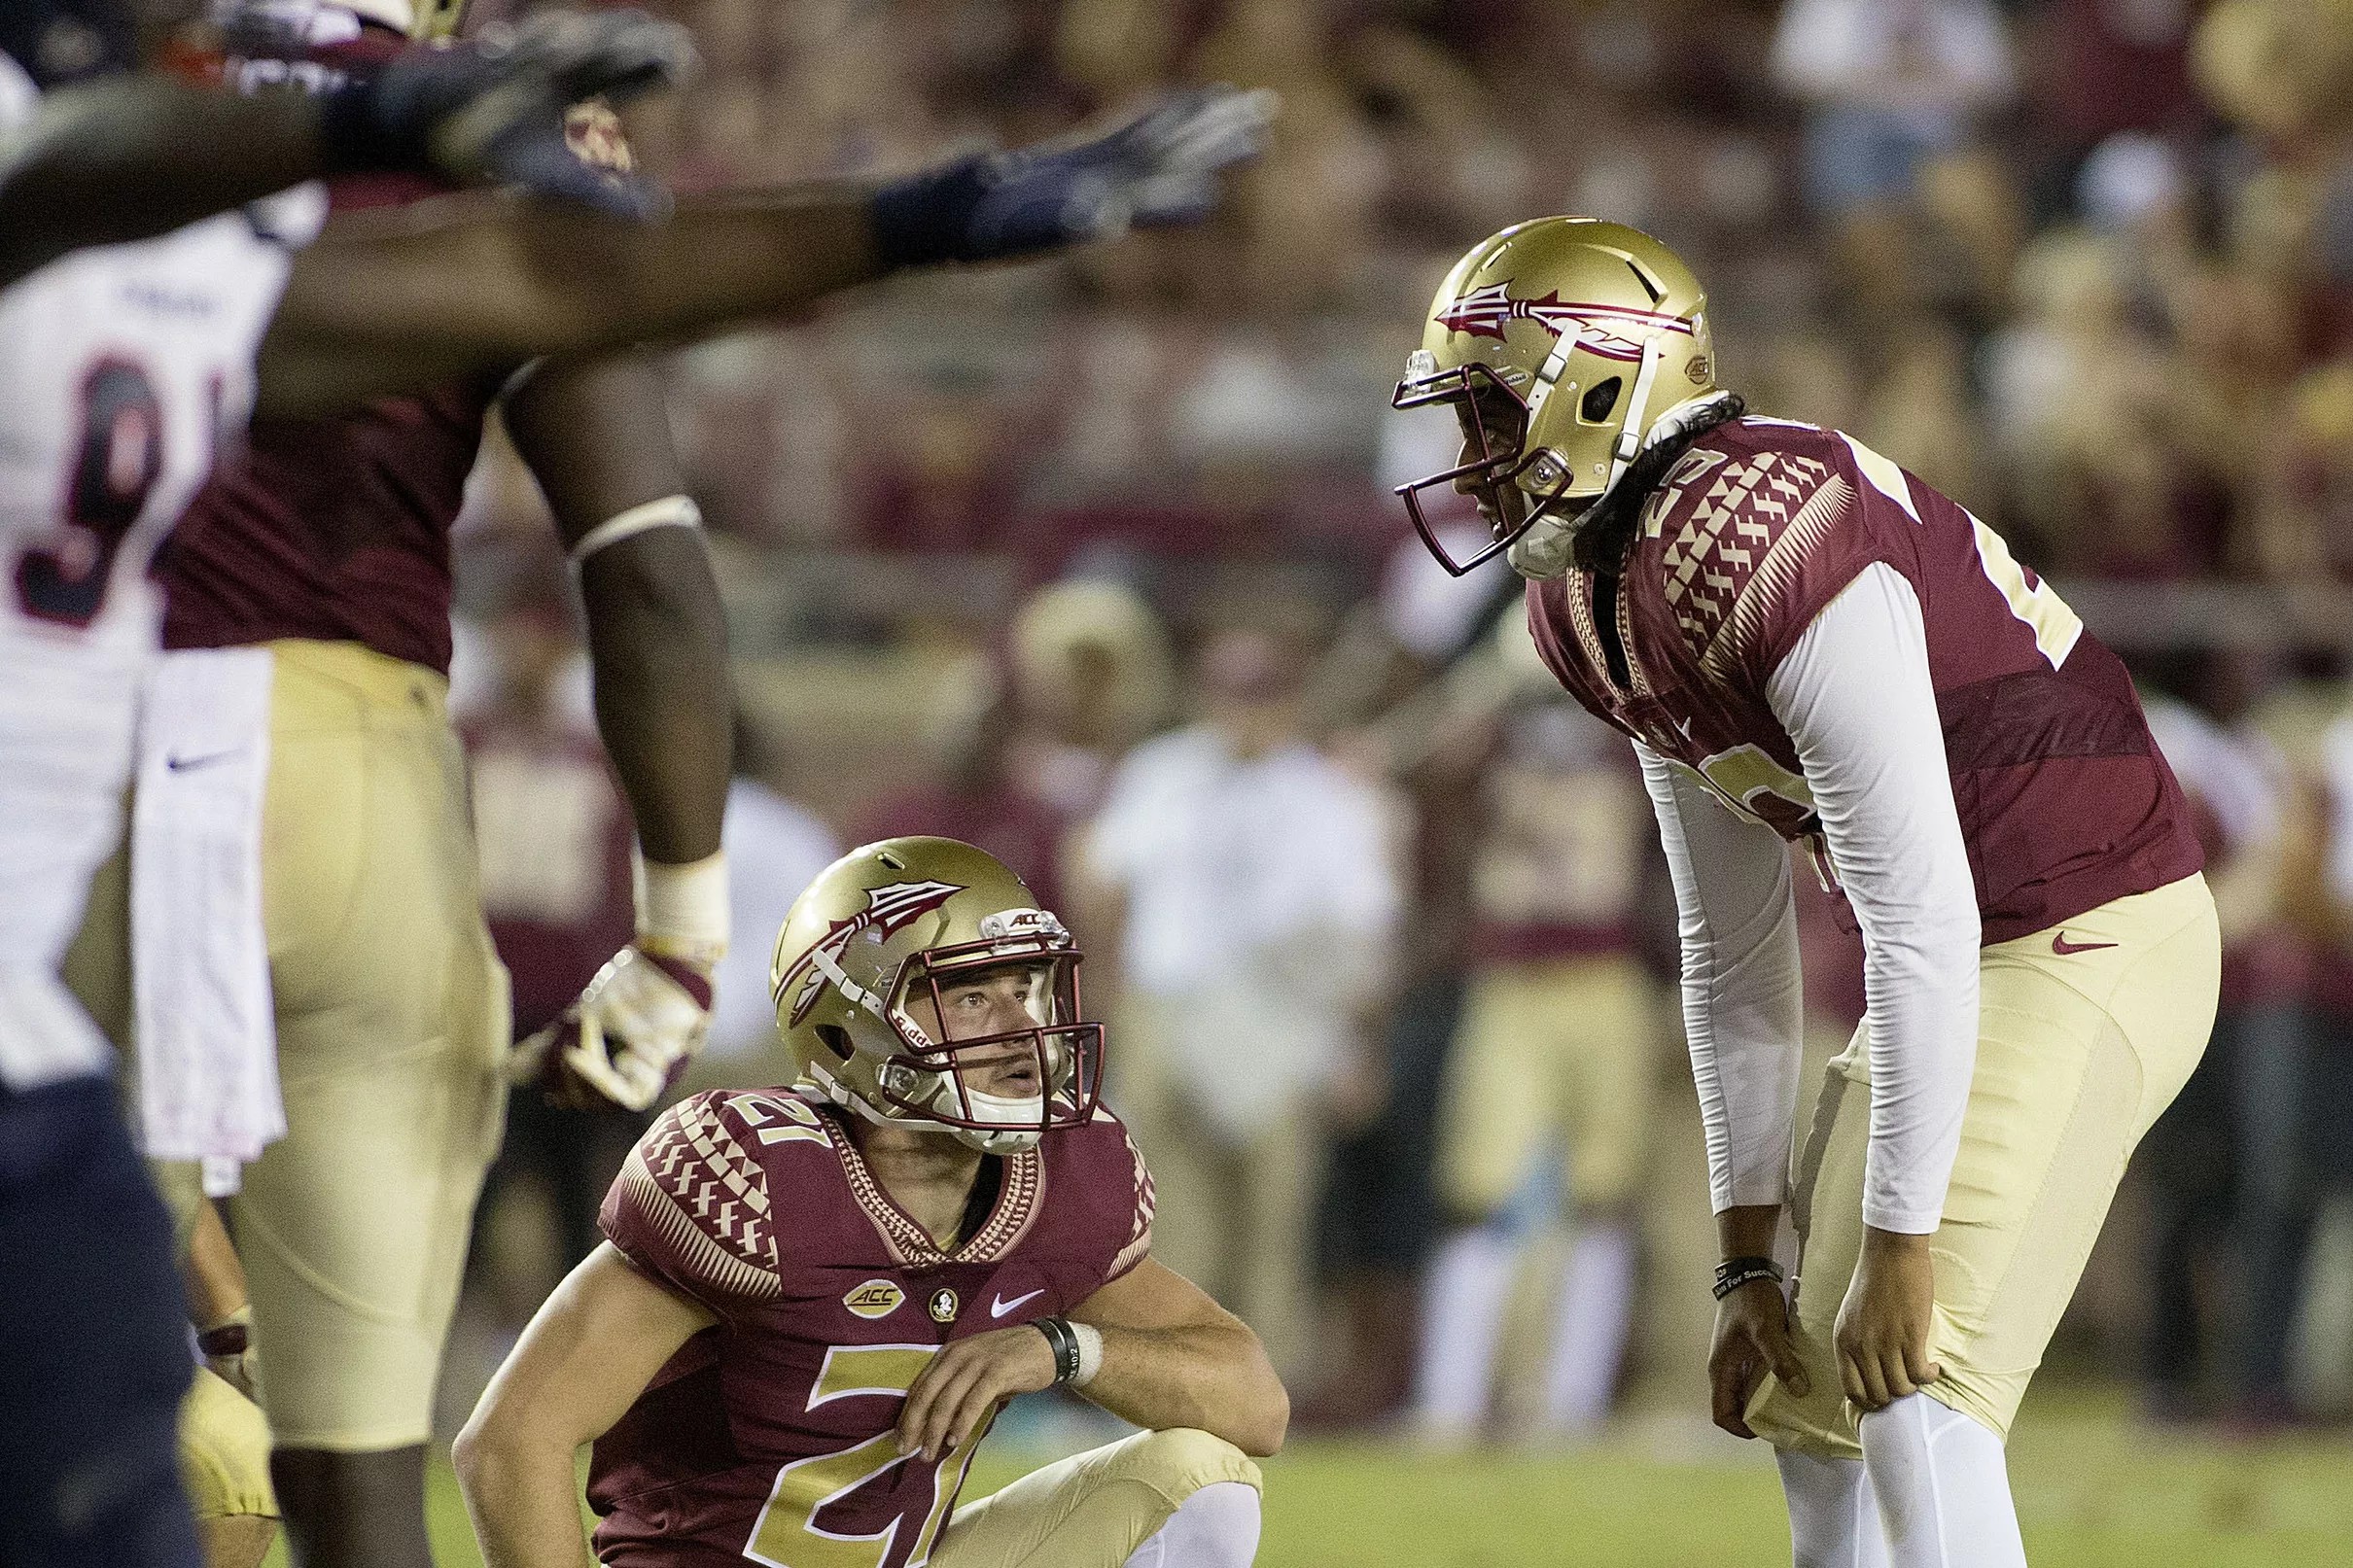 No FBS team with numerous fieldgoal attempts is less successful than FSU